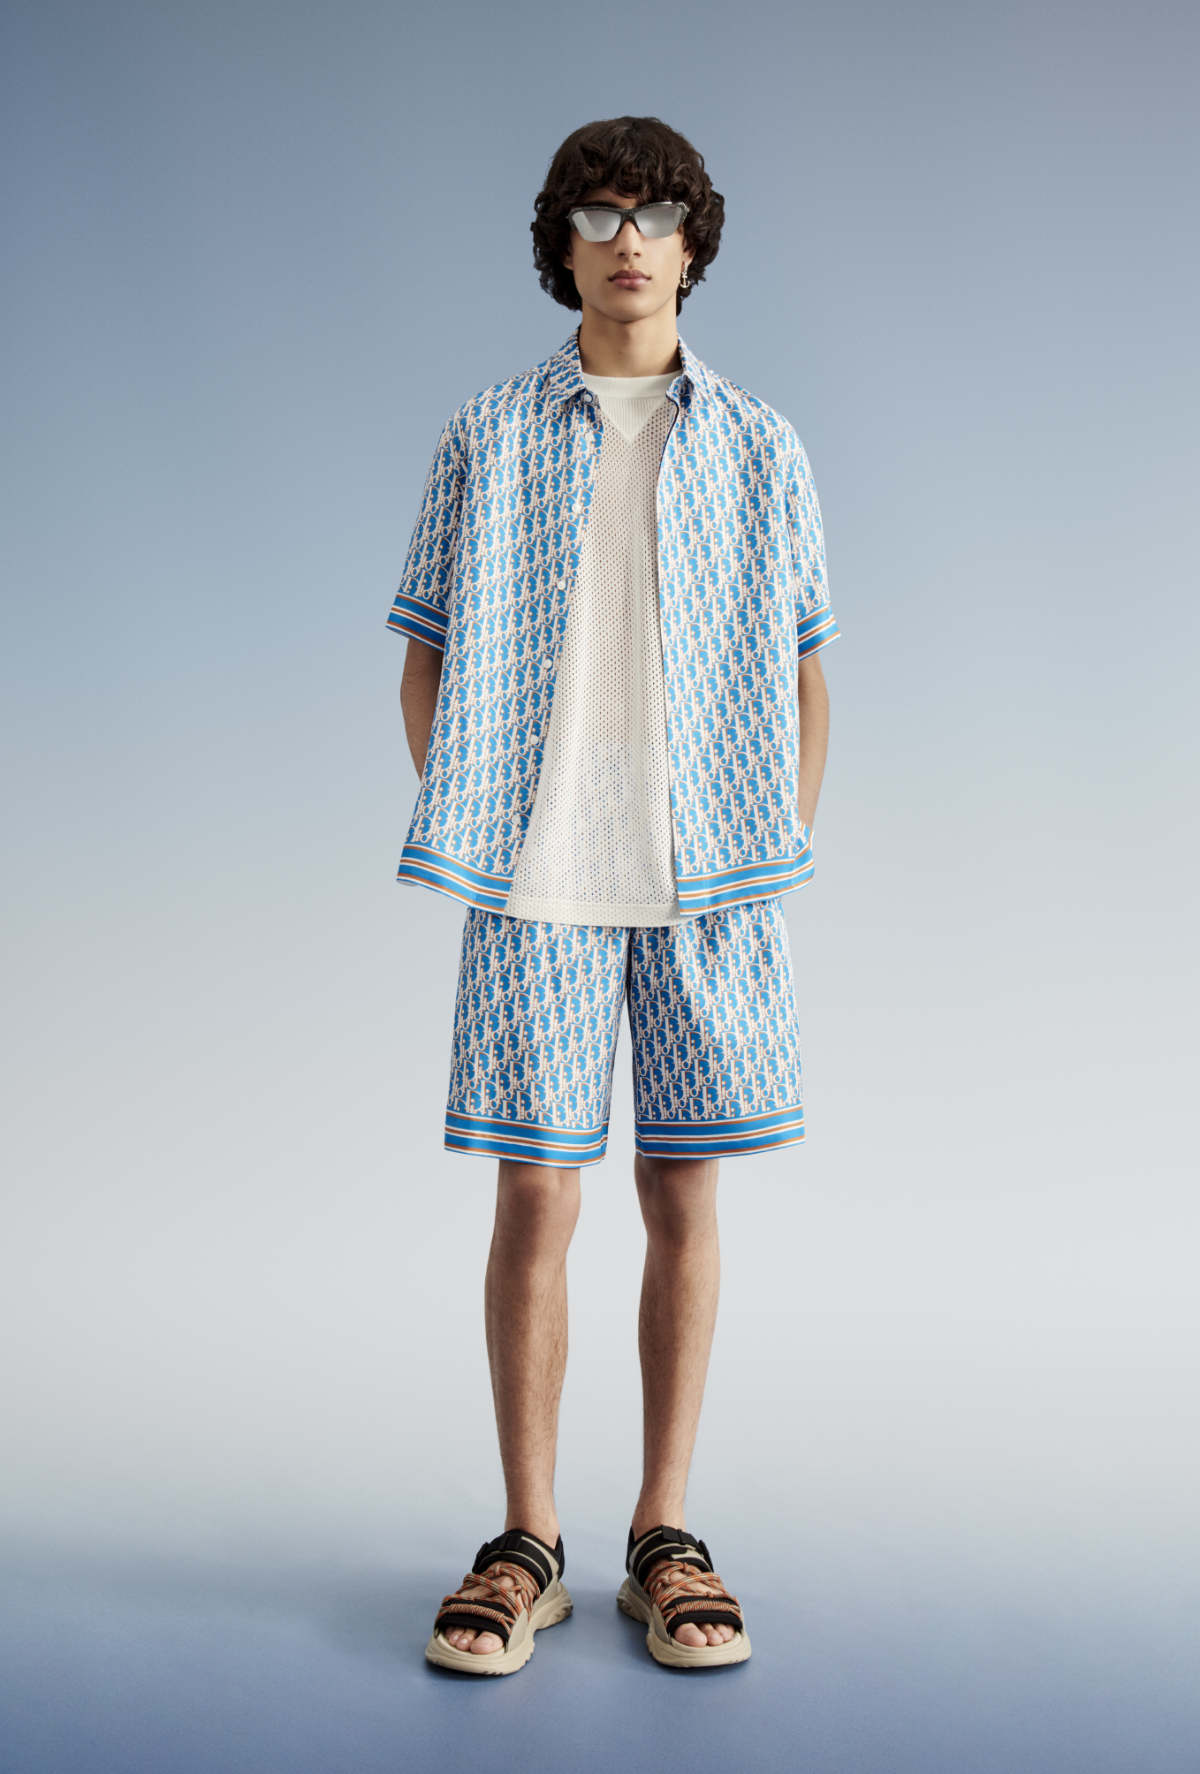 Dior Presents Its New Men's Beachwear Capsule 2022 Collection